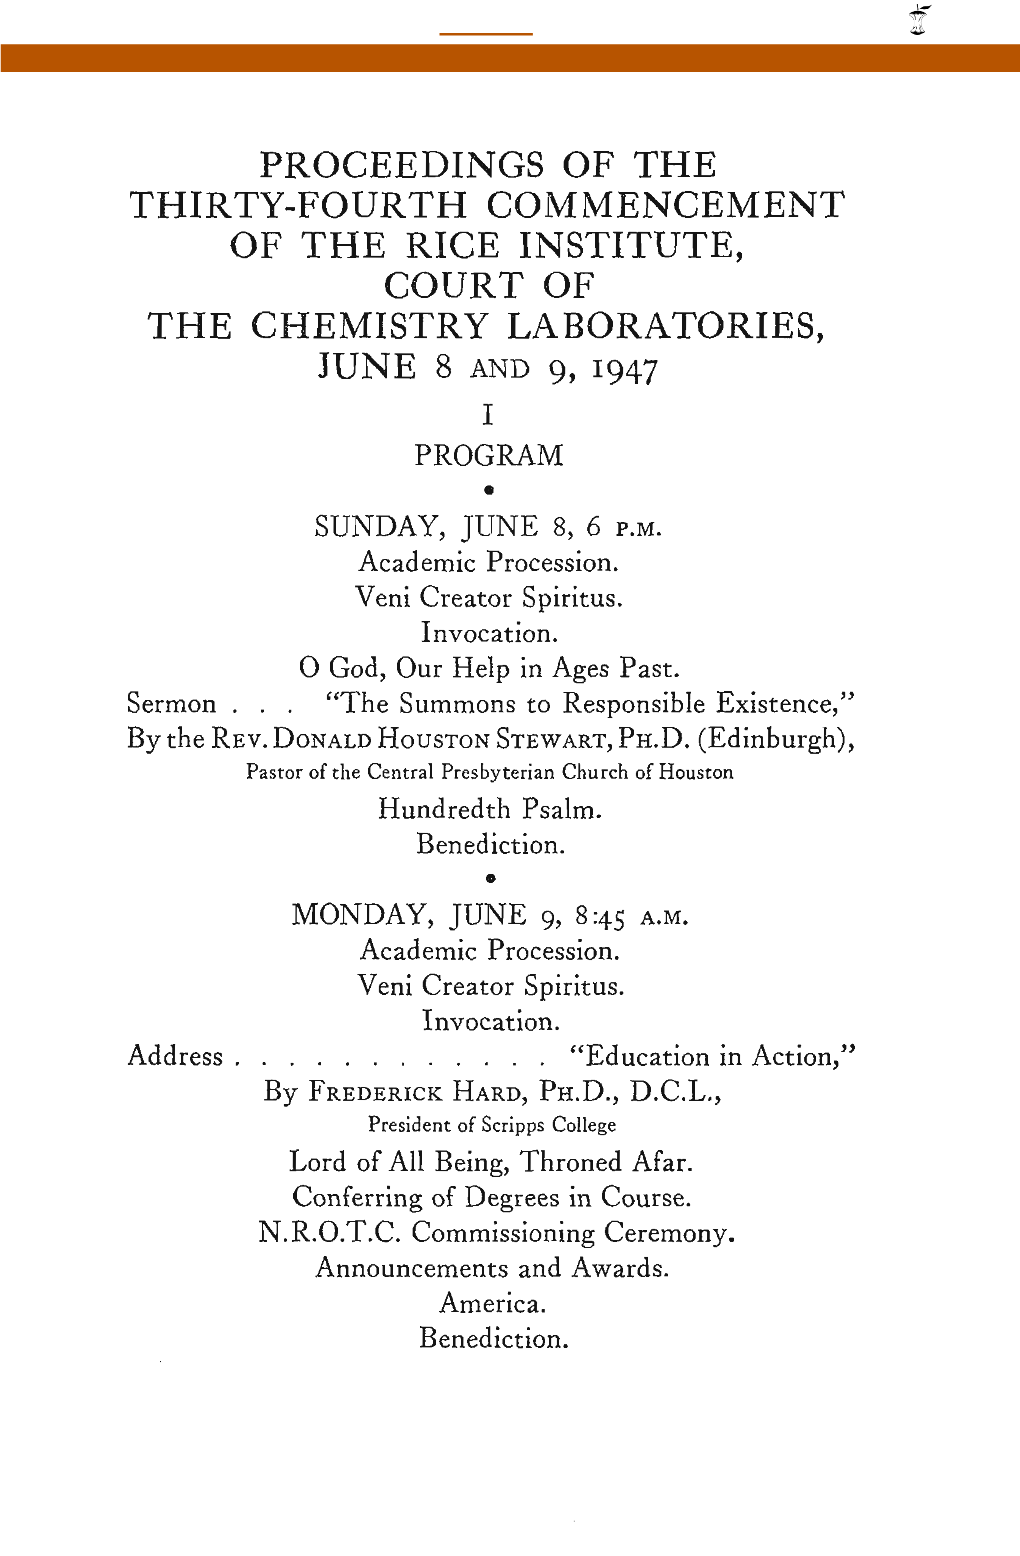 PROCEEDINGS of the THIRTY-FOURTH COMMENCEMENT of the RICE INSTITUTE, COURT of the CHEMISTRY LABORATORIES, JUNE 8 and 9, 1947 I PROGRAM a SUNDAY, JUNE 8, 6 P.M